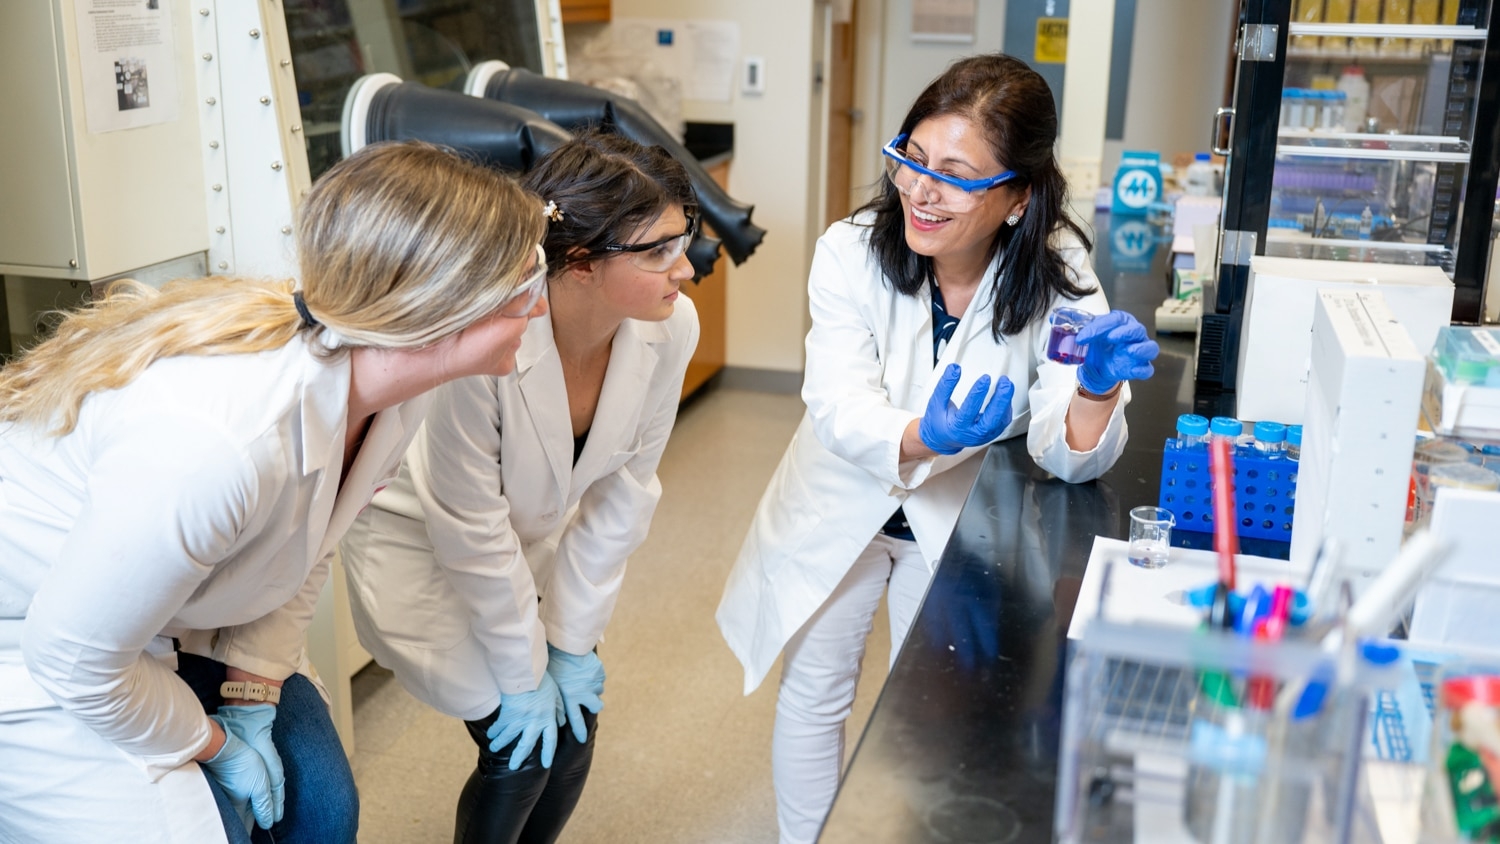 In a lab wearing a lab coat, gloves and goggles, Januka Budhathoki-Uprety (right) explains a concept to Ashley Lamb and Hannah Dewey.